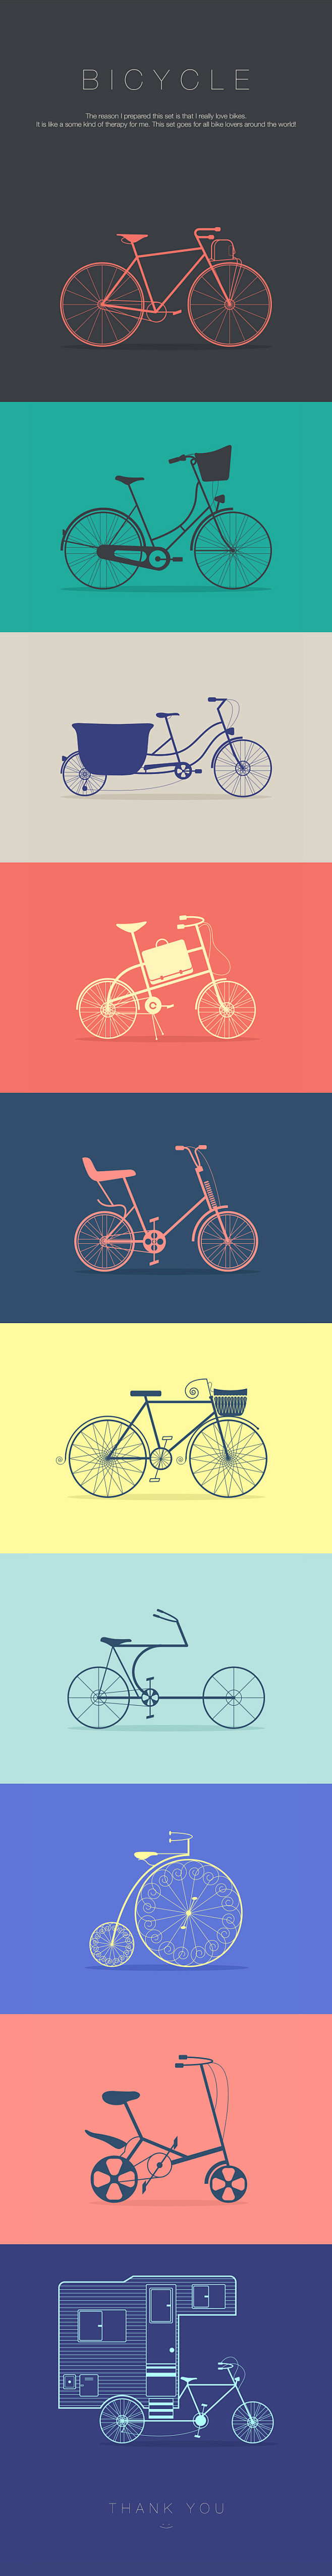 Bicycle Icon Set by ...